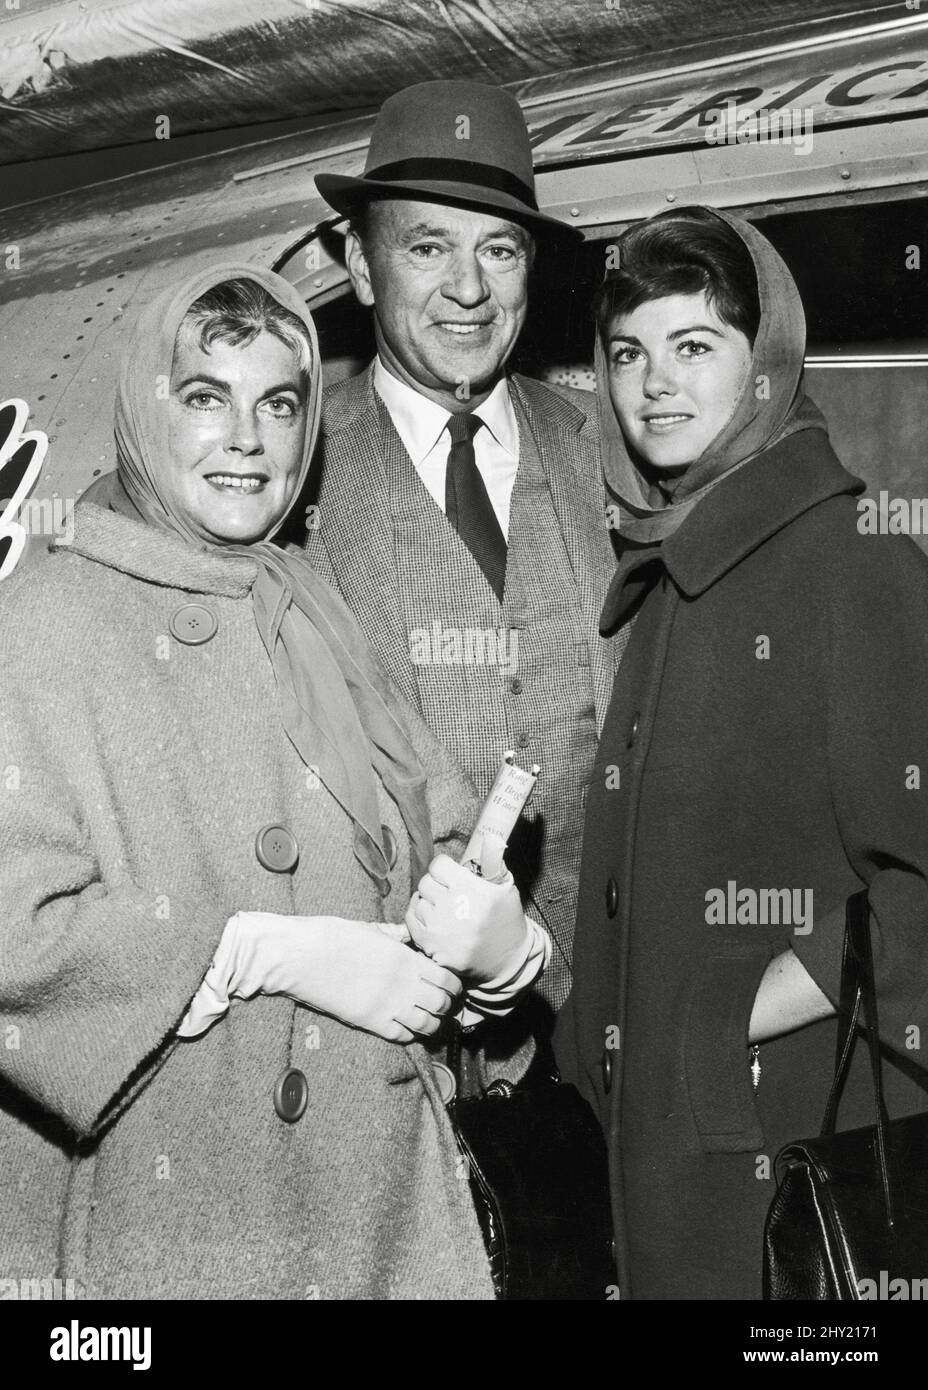 Gary Cooper, wife Veronica Balfe, daughter Maria Cooper traveling to Los Angeles, Ca. 1961. File Reference # 34145-550THA Stock Photo